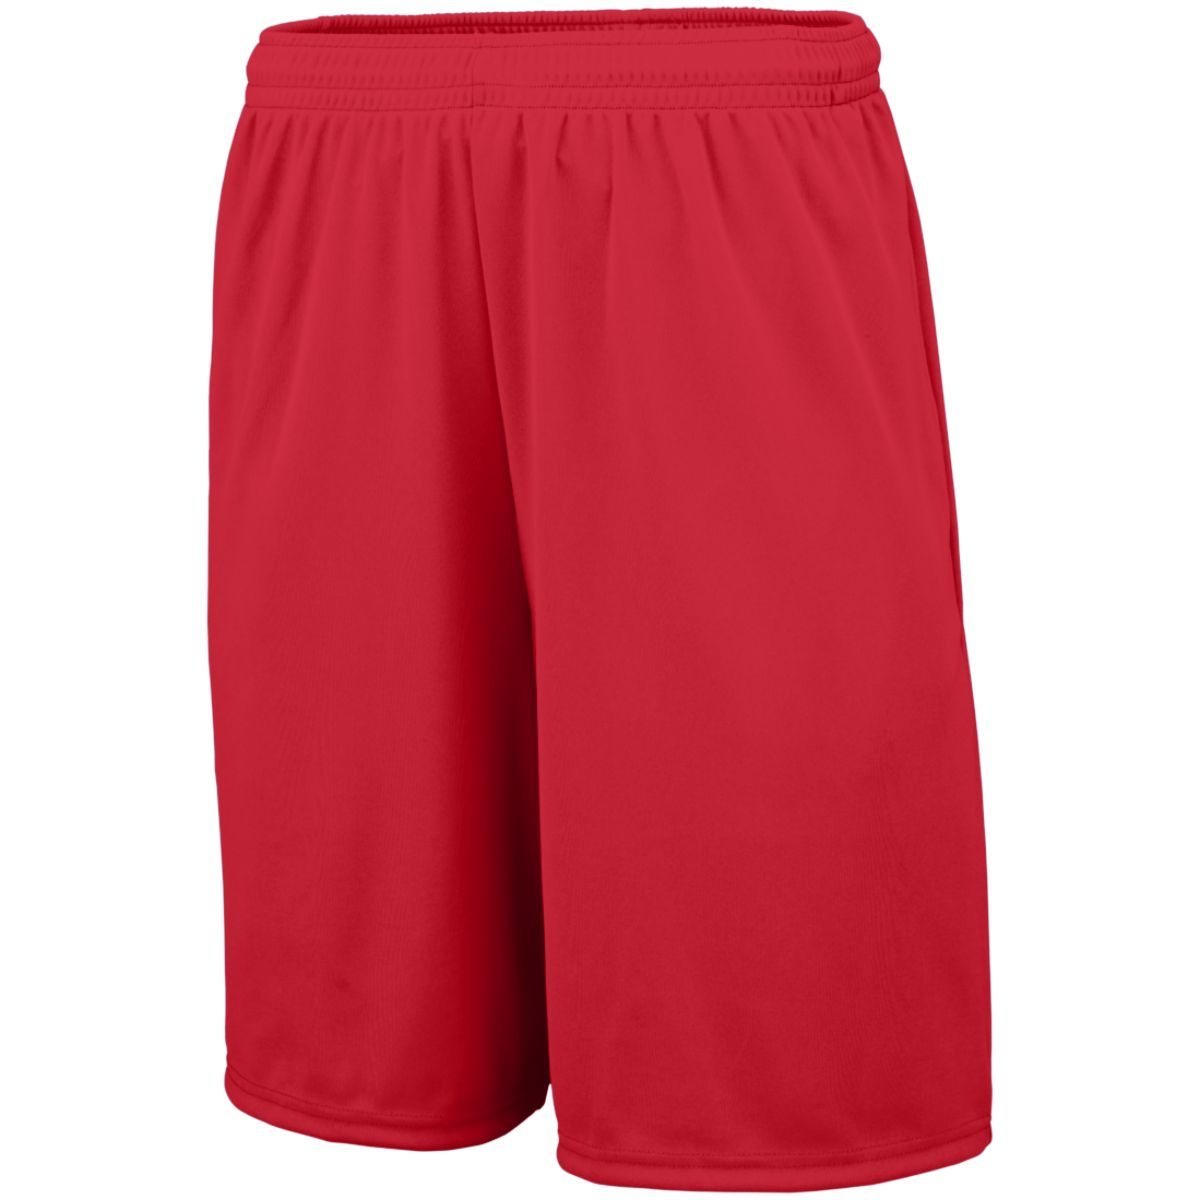 Augusta Sportswear Youth Training Shorts With Pockets in Red  -Part of the Youth, Youth-Shorts, Augusta-Products, Lacrosse, All-Sports, All-Sports-1 product lines at KanaleyCreations.com